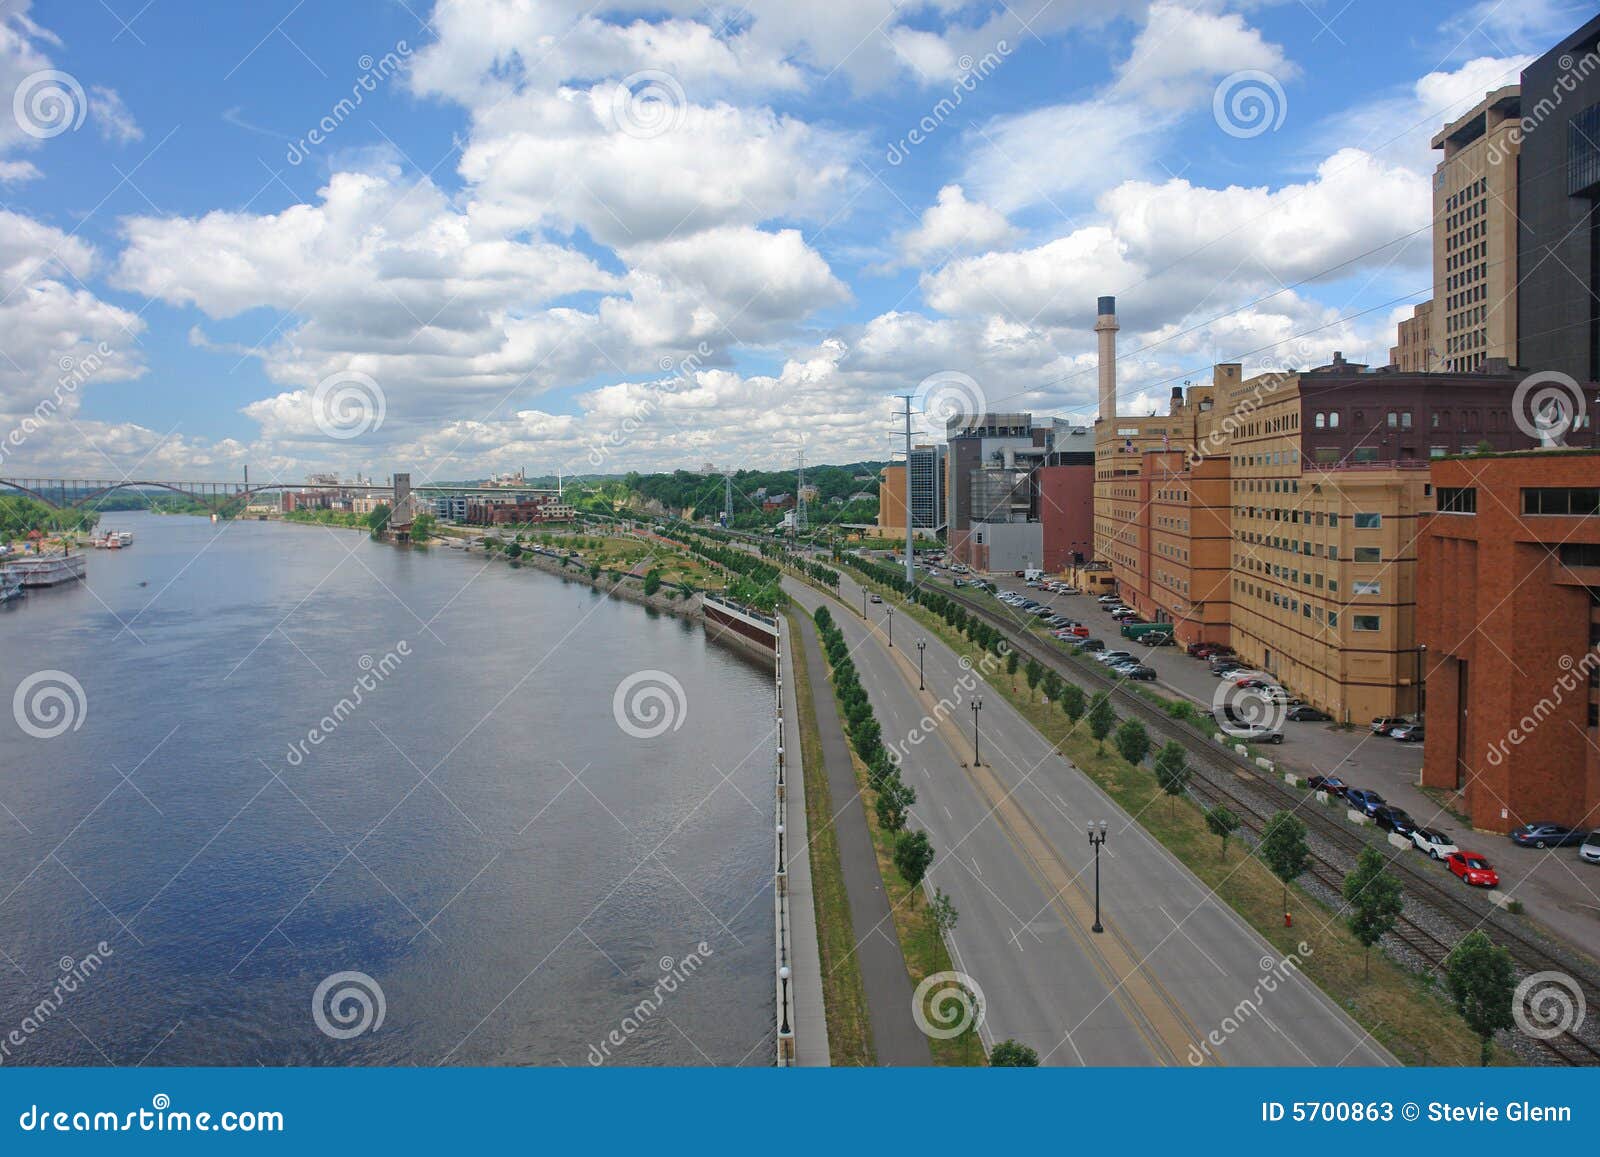 city of st. paul by river